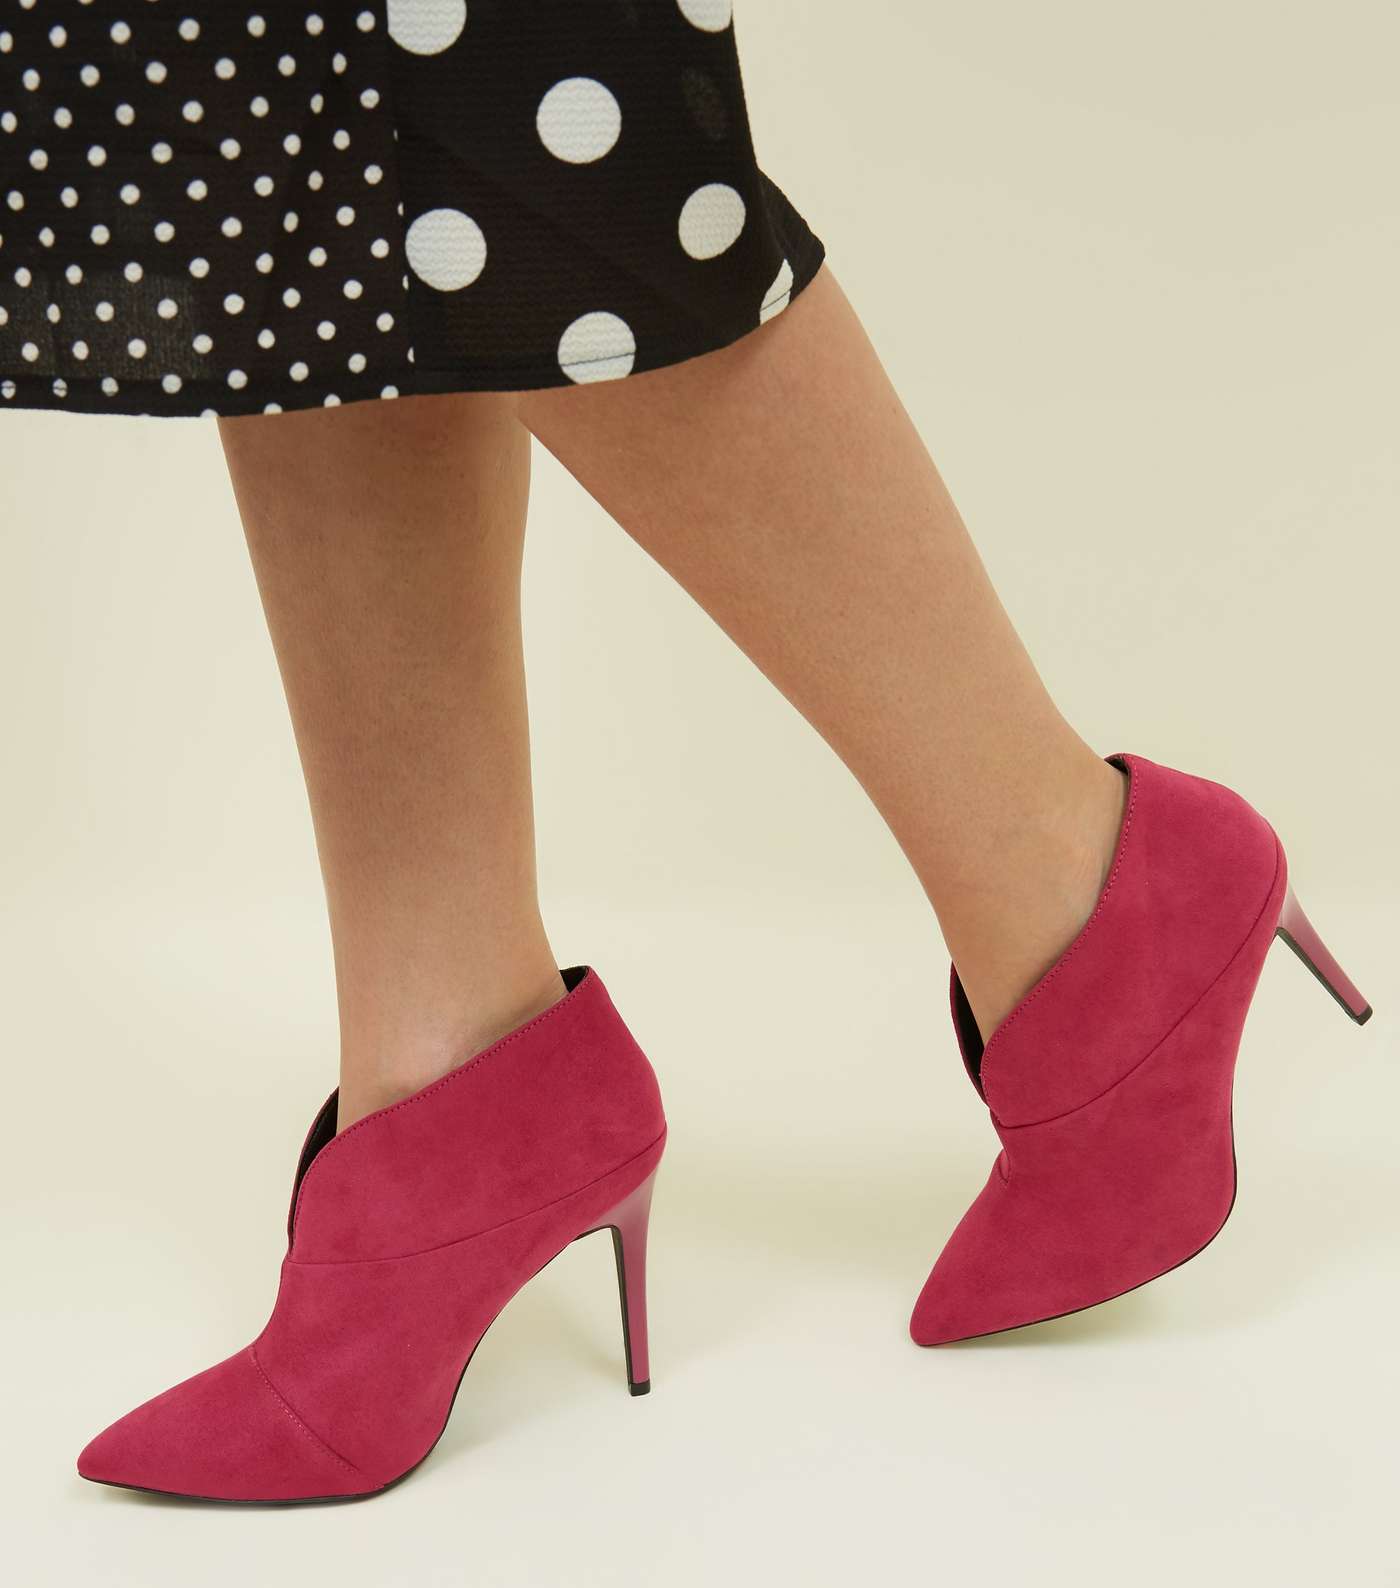 Wide Fit Bright Pink Suedette Cut-Out Front Stiletto Boots Image 2